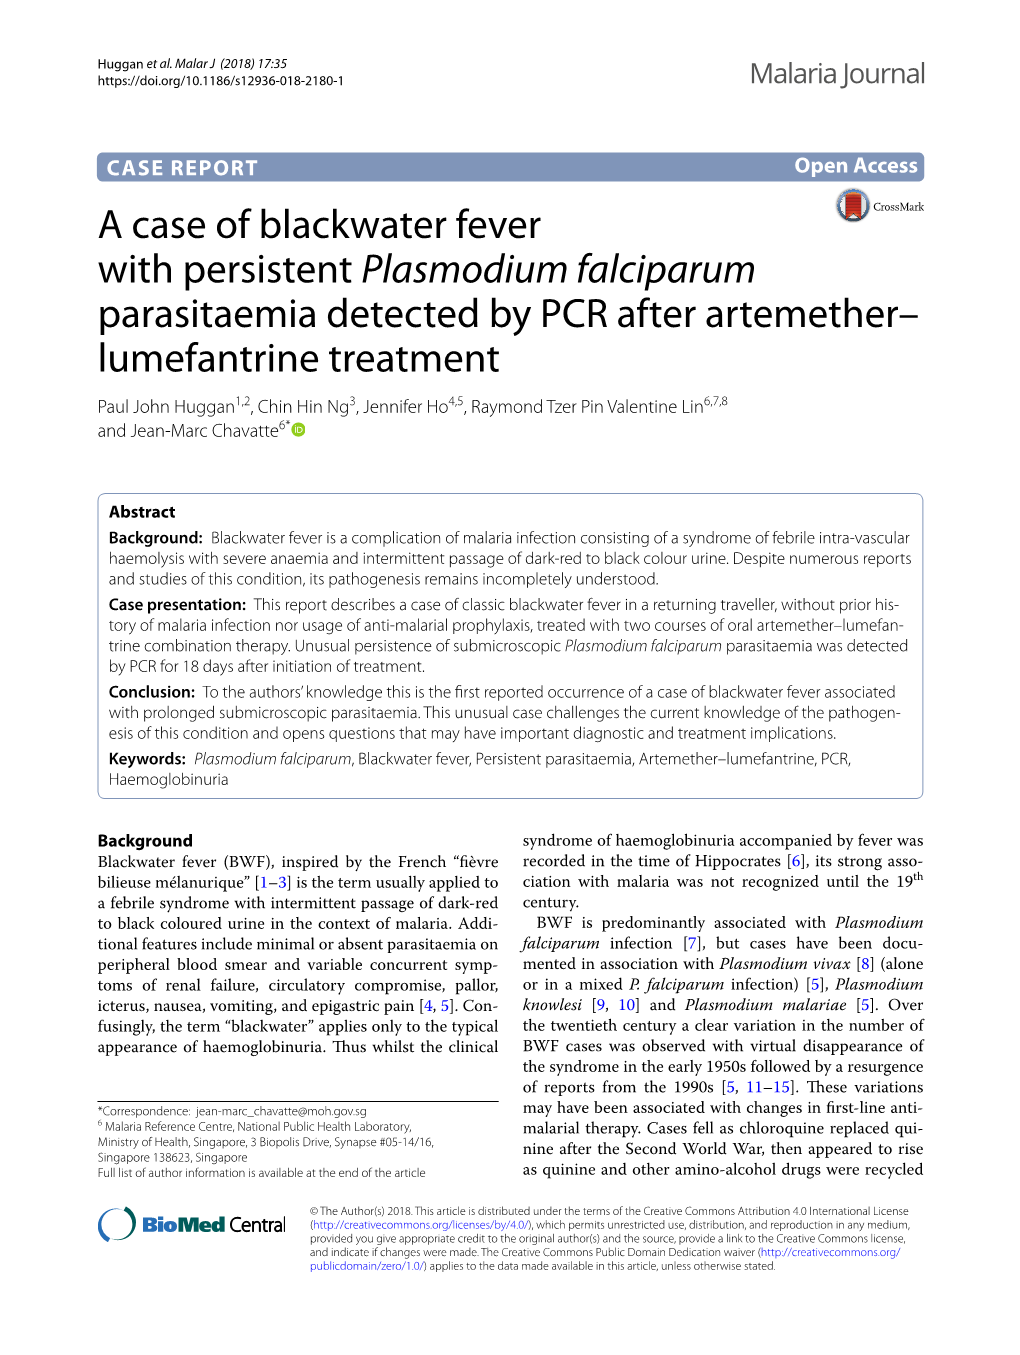 A Case of Blackwater Fever with Persistent Plasmodium Falciparum